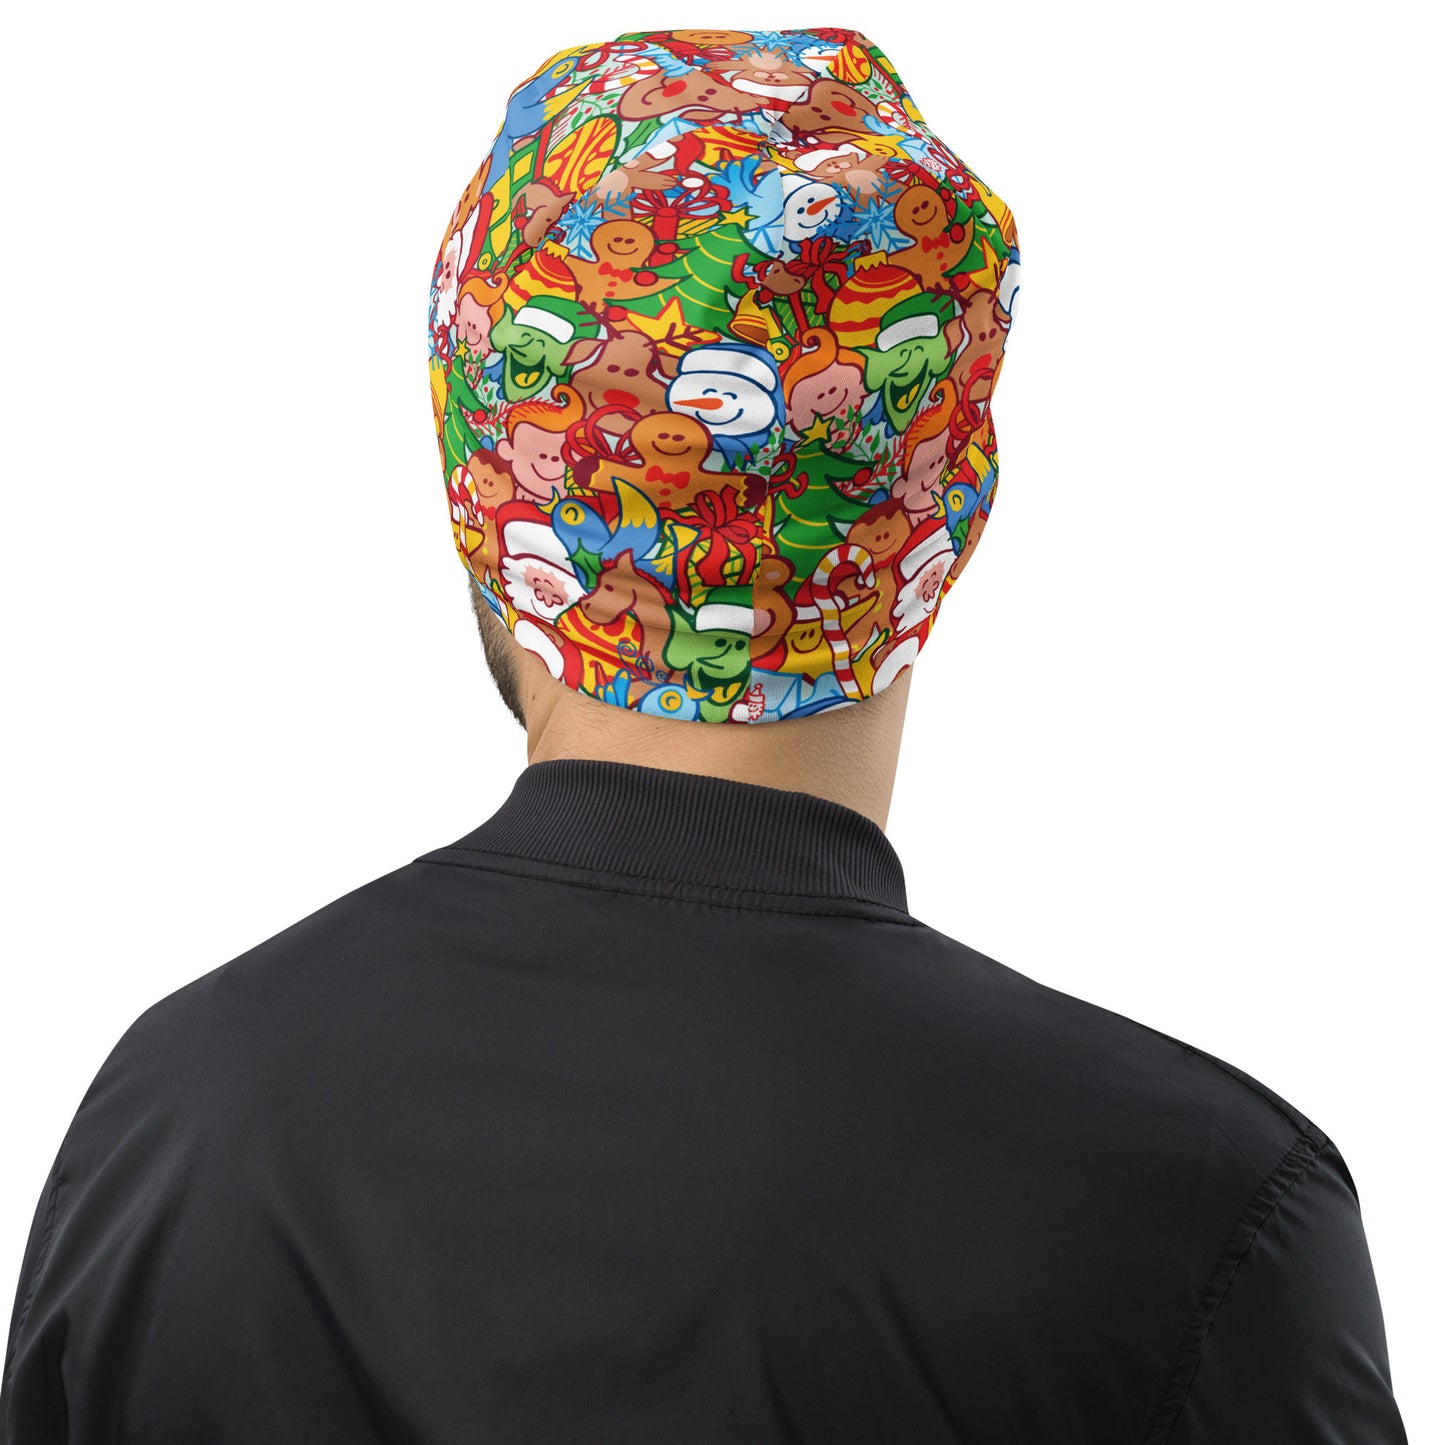 All Christmas stars in a pattern design All-Over Print Beanie. Back view